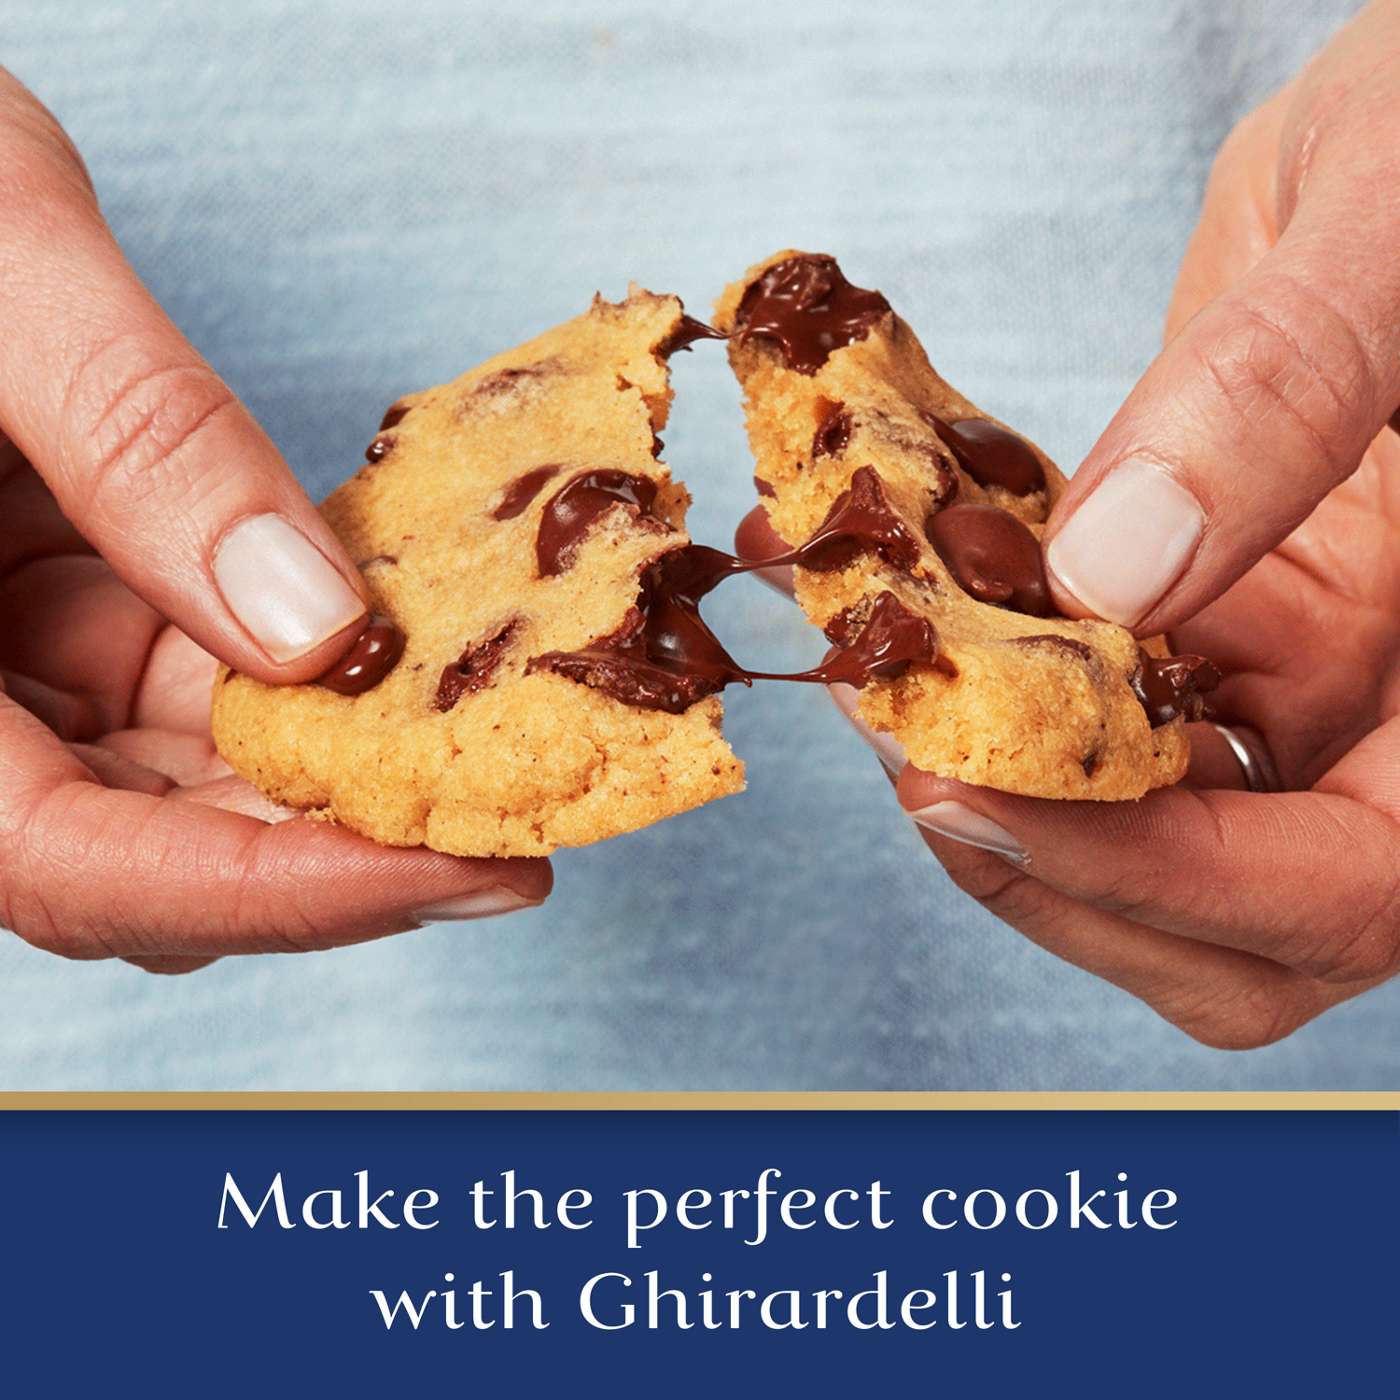 Ghirardelli 72% Cacao Dark Chocolate Premium Baking Chips, Chocolate Chips for Baking; image 4 of 7